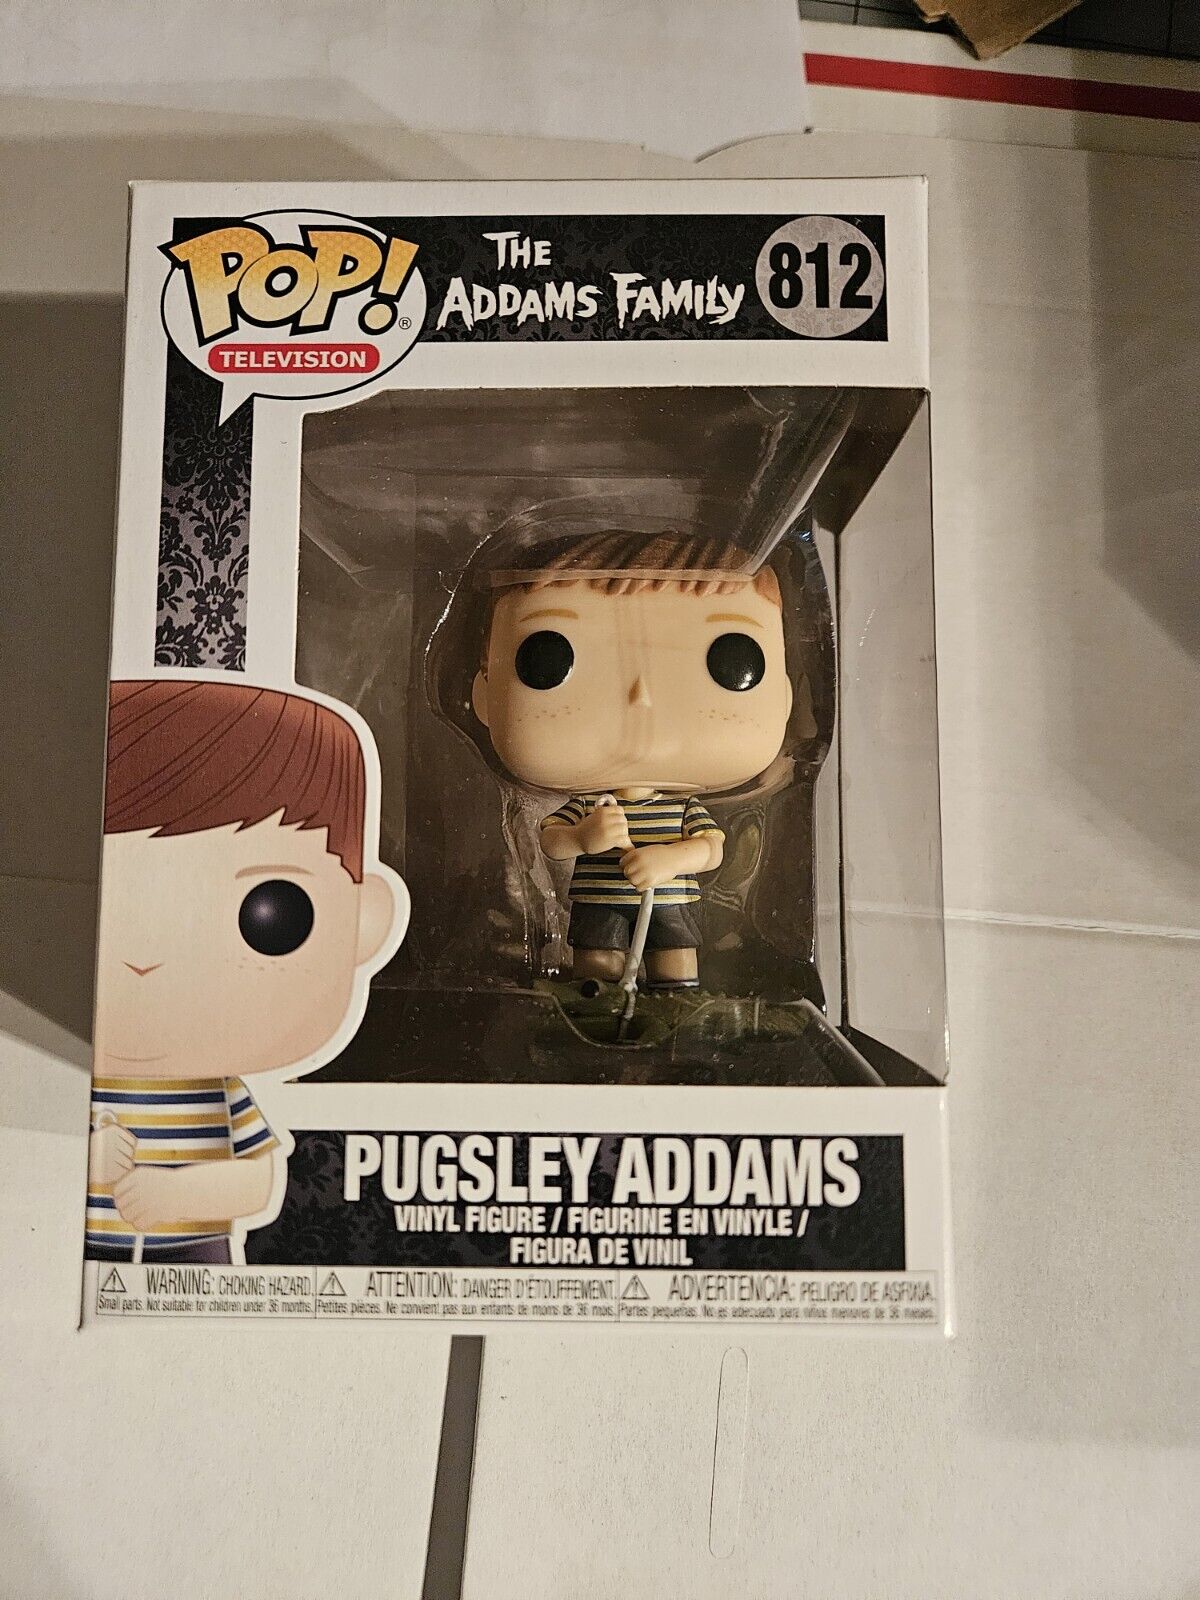 The Addams Family  Pugsley Addams FUNKO POP 812 Television  W/PROTECTOR 